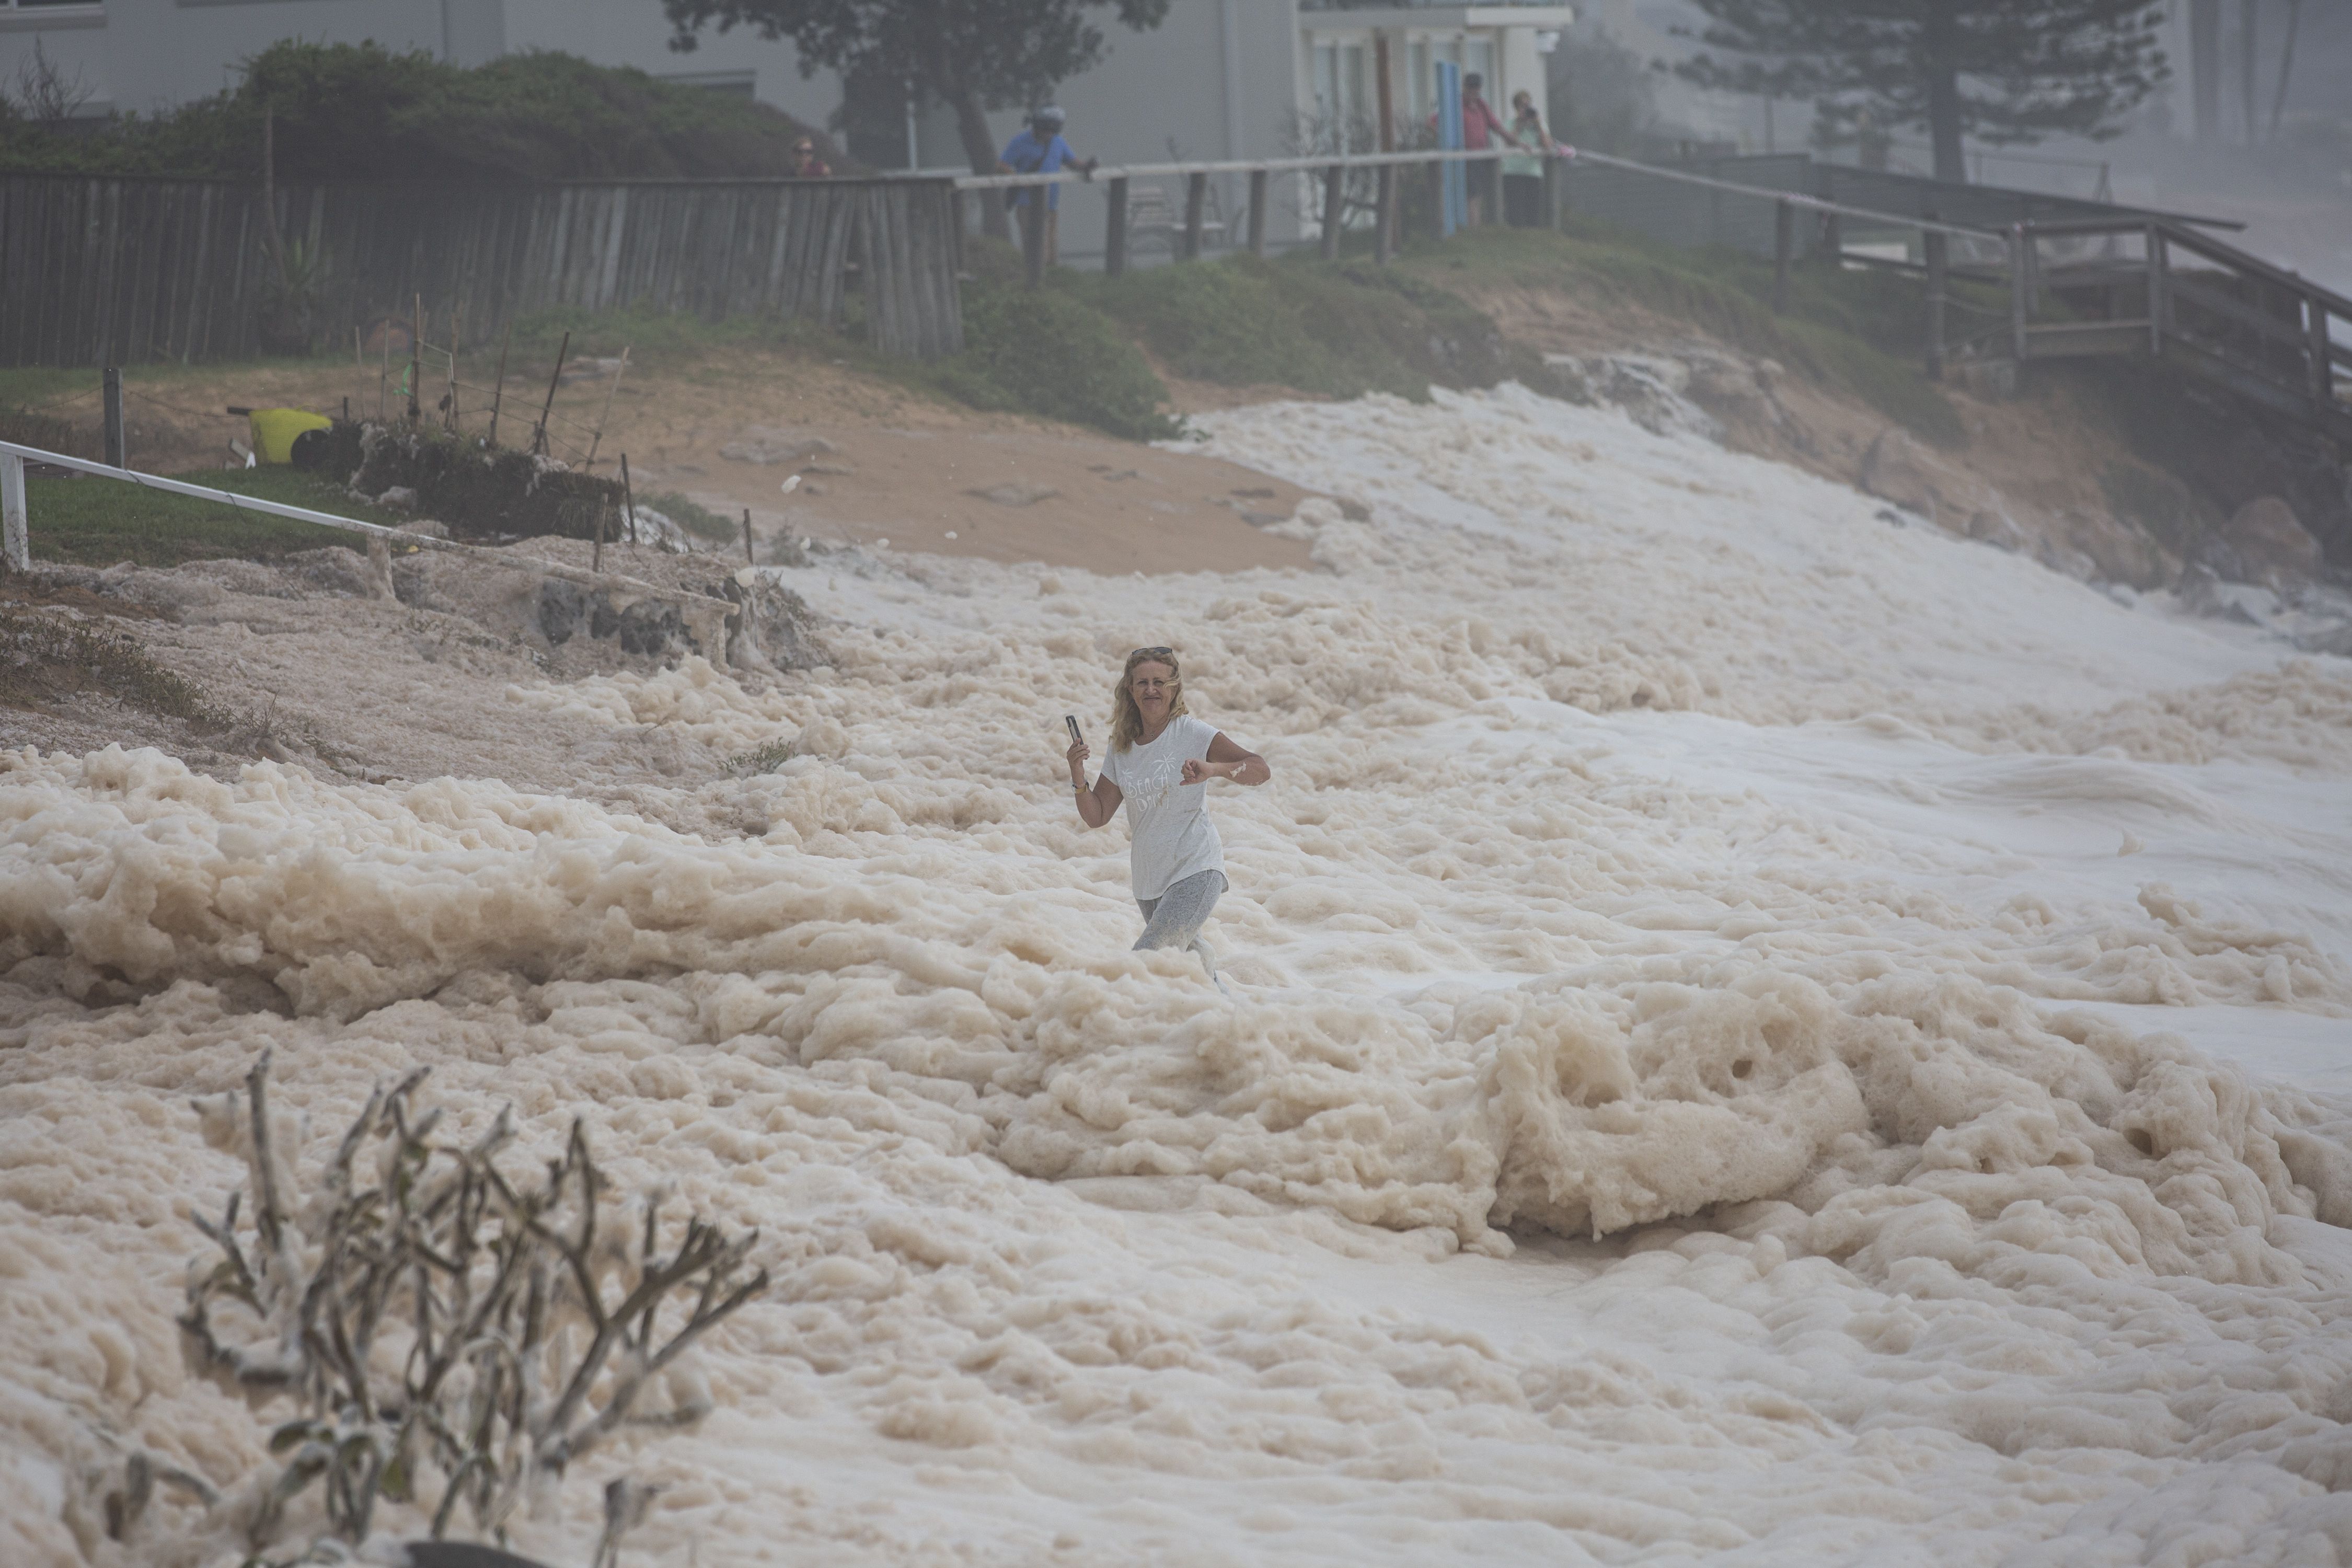 A Collaroy resident watches on at Collaroy on the Northern Beaches as a high tide and large waves impact the coast on February 10, 2020 in Sydney